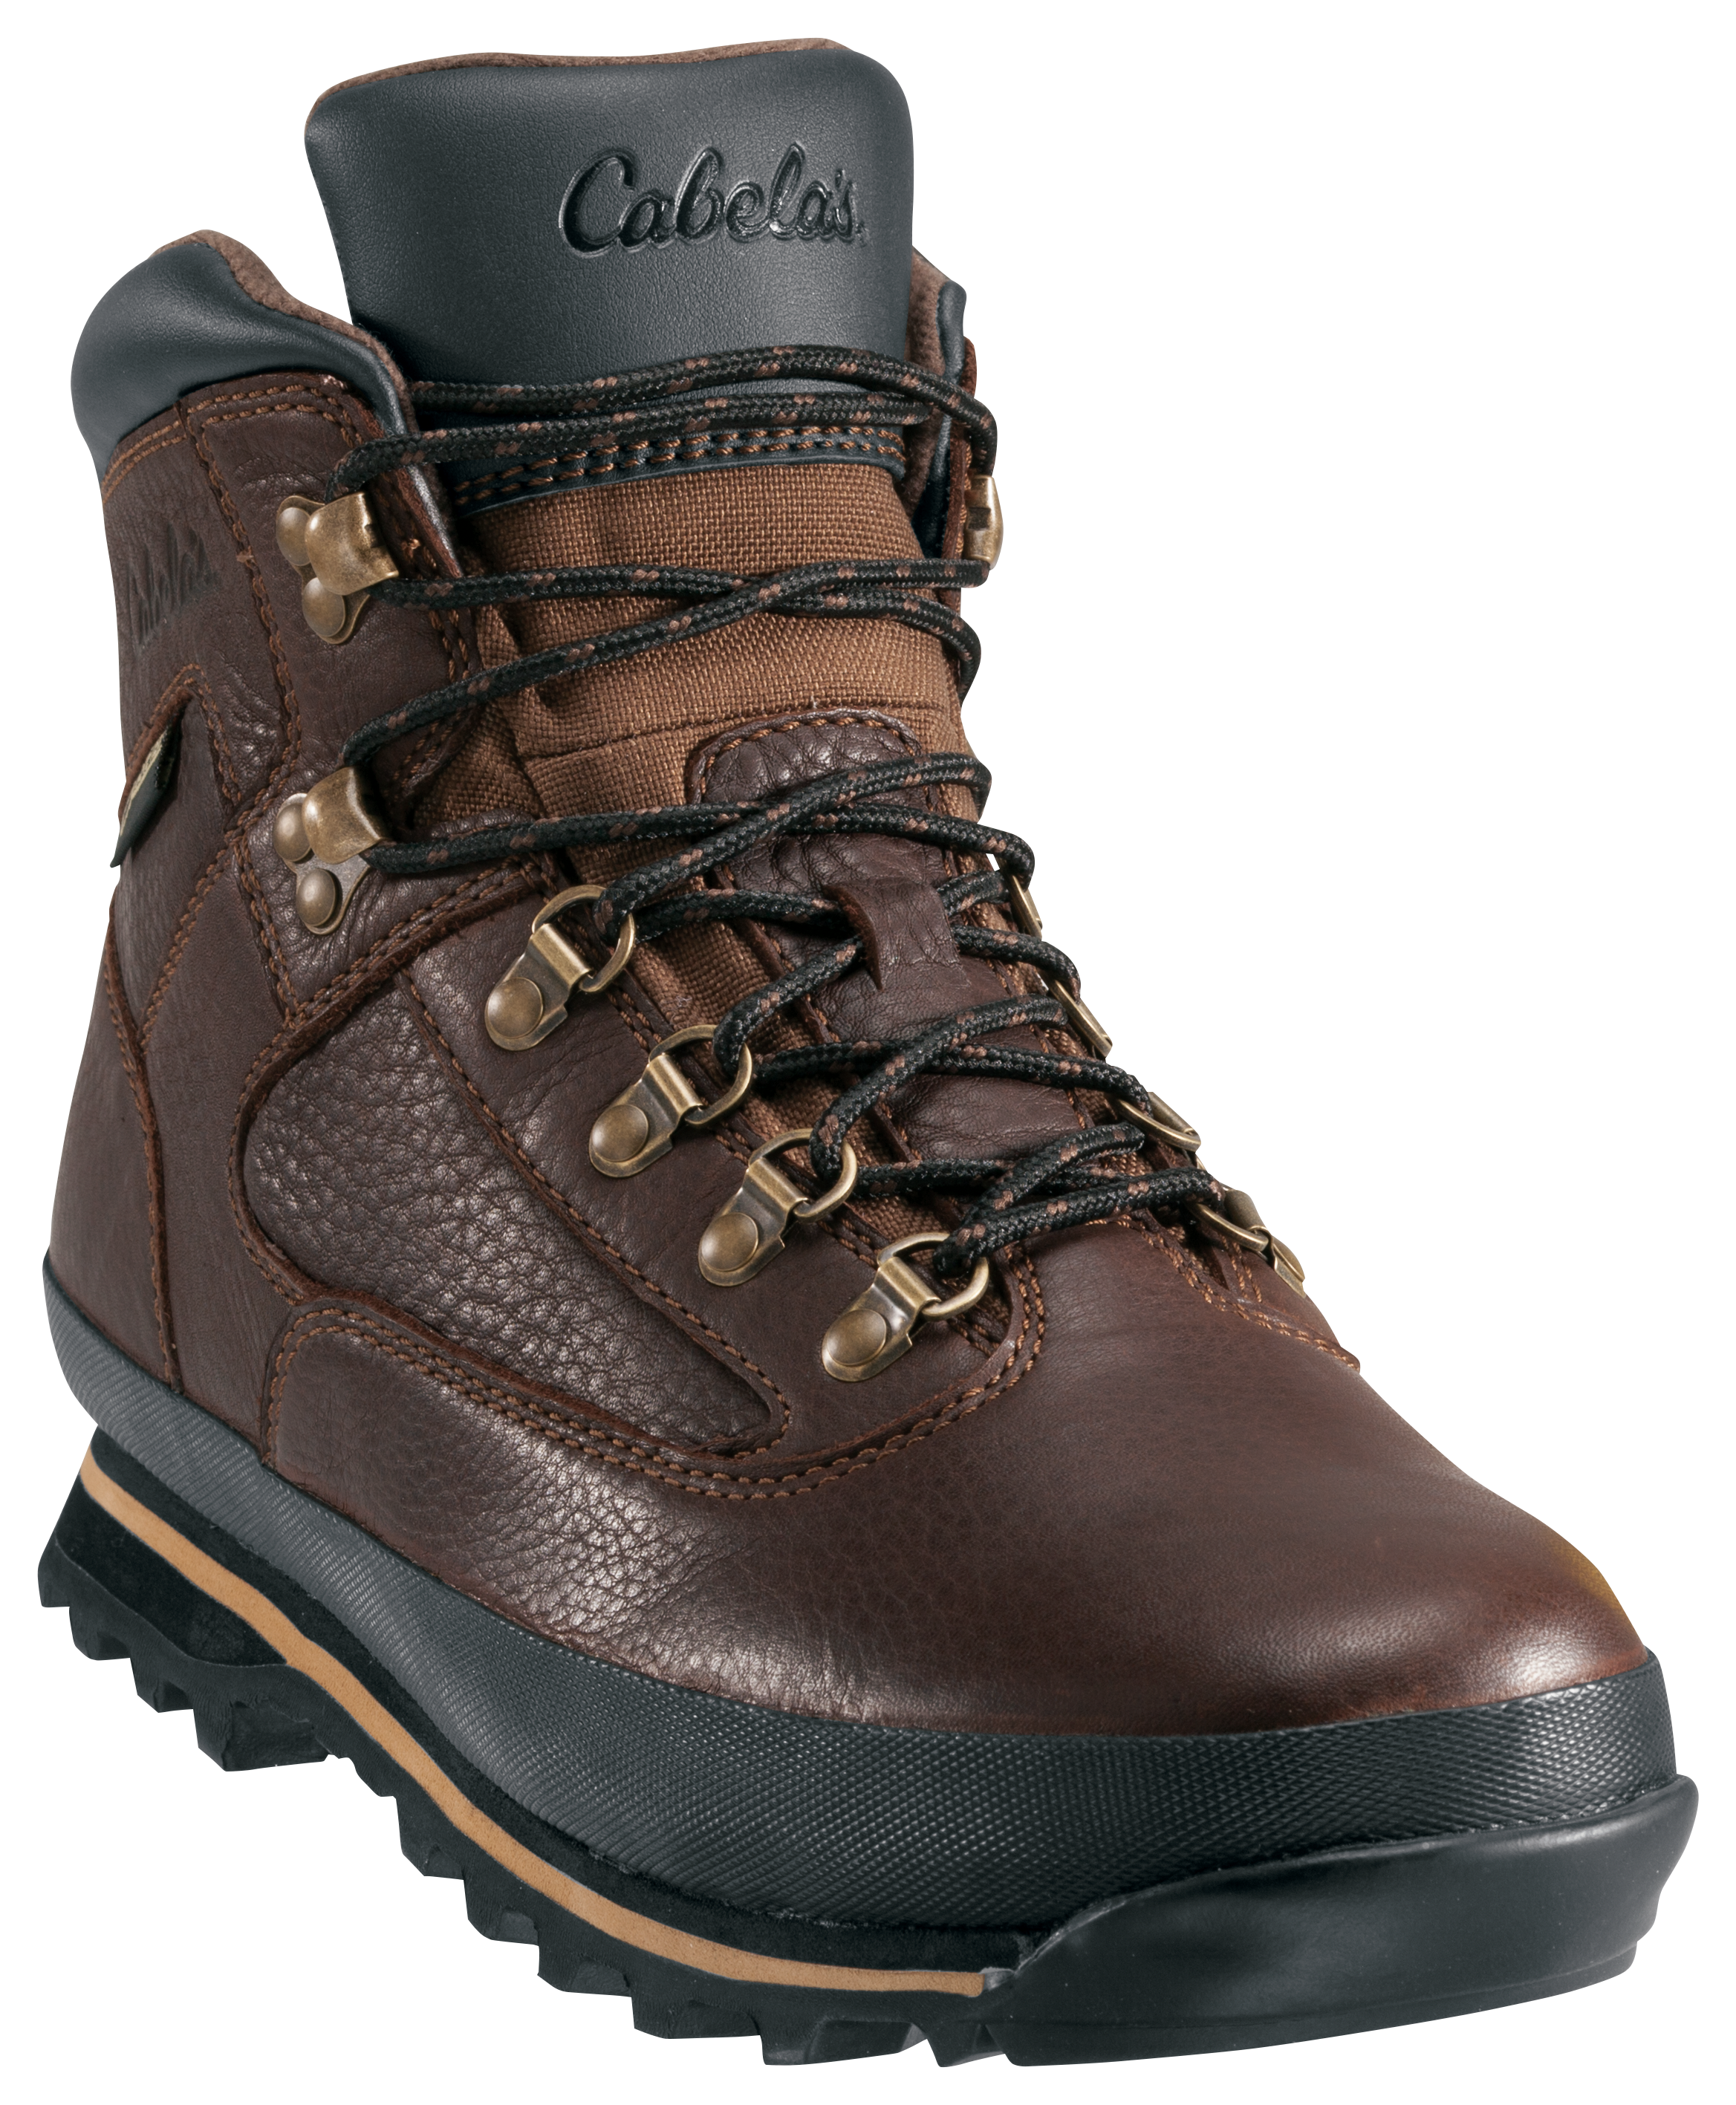 Cabela's Rimrock Mid GORE-TEX Hiking Boots for Men - Brown - 9M